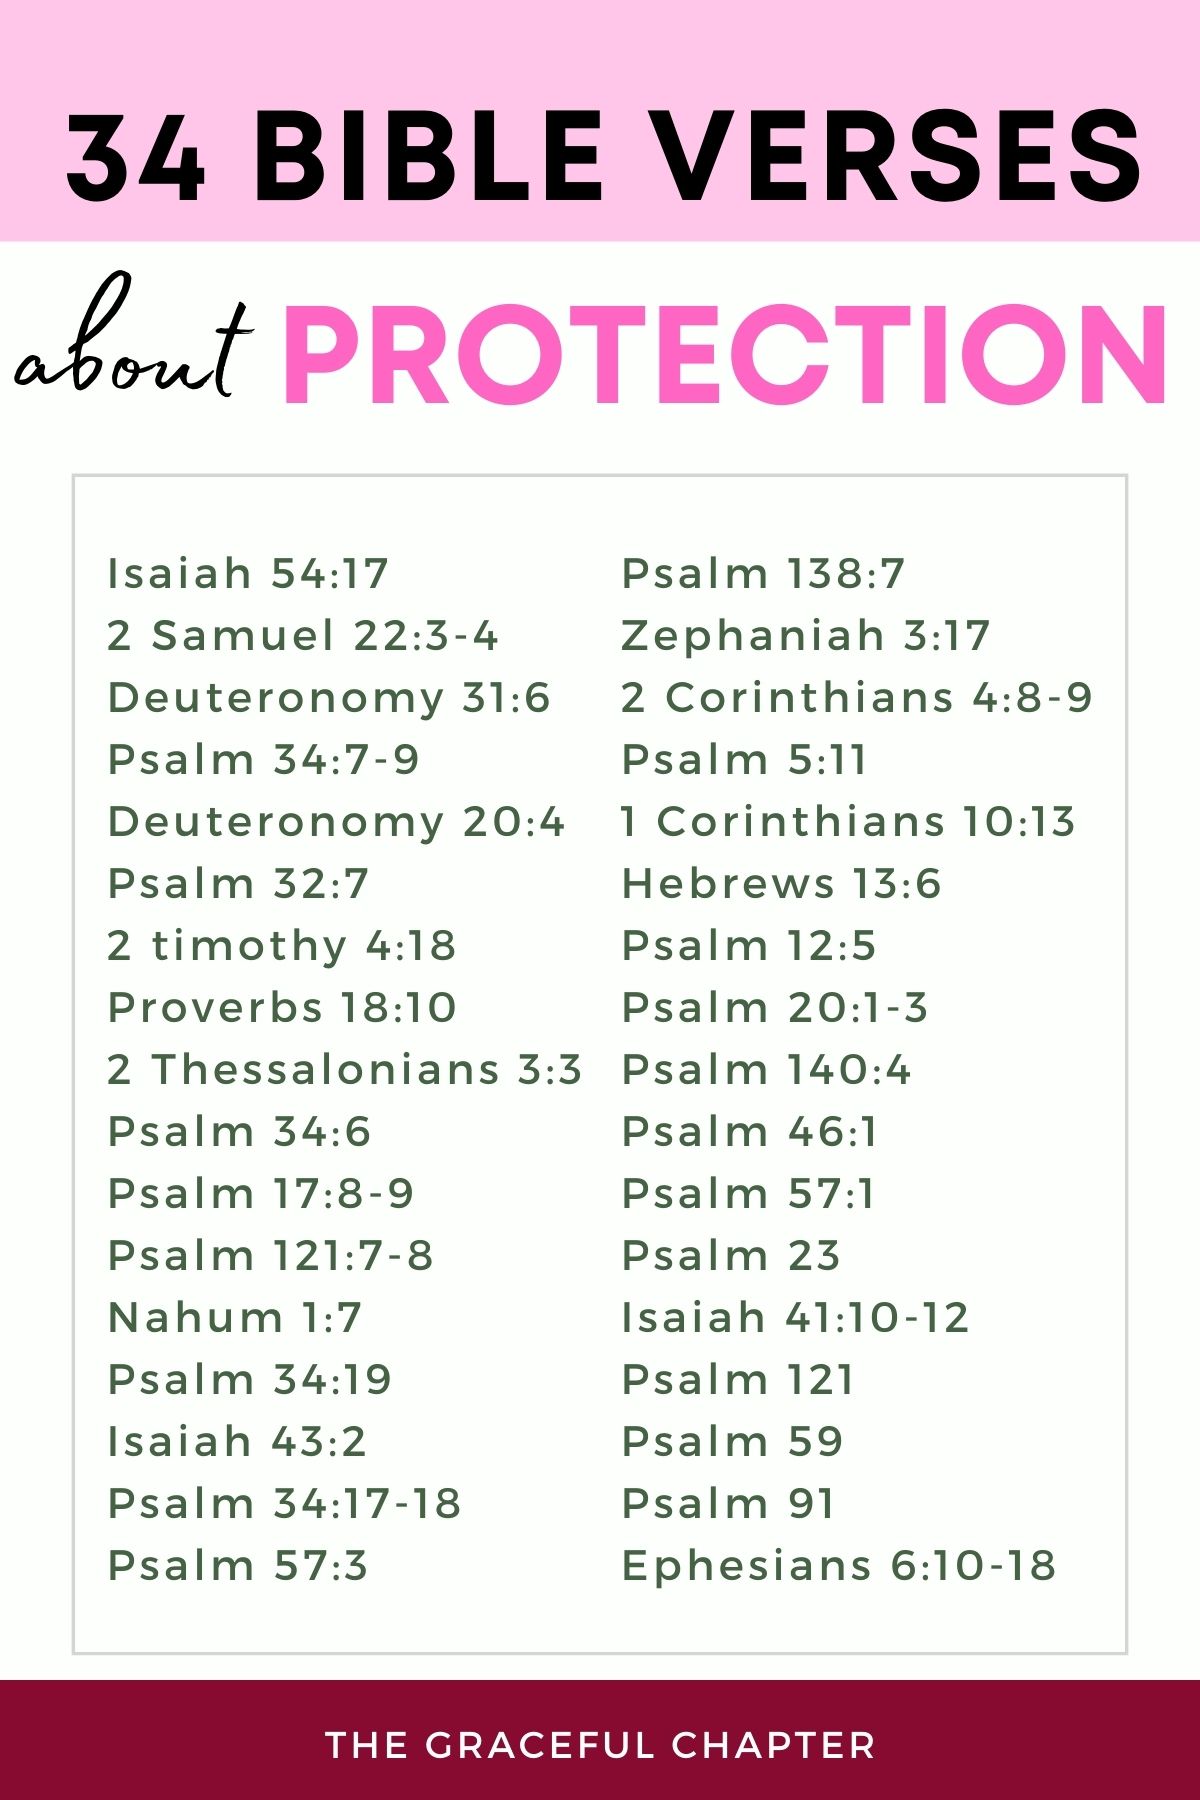 34 bible verses about protection